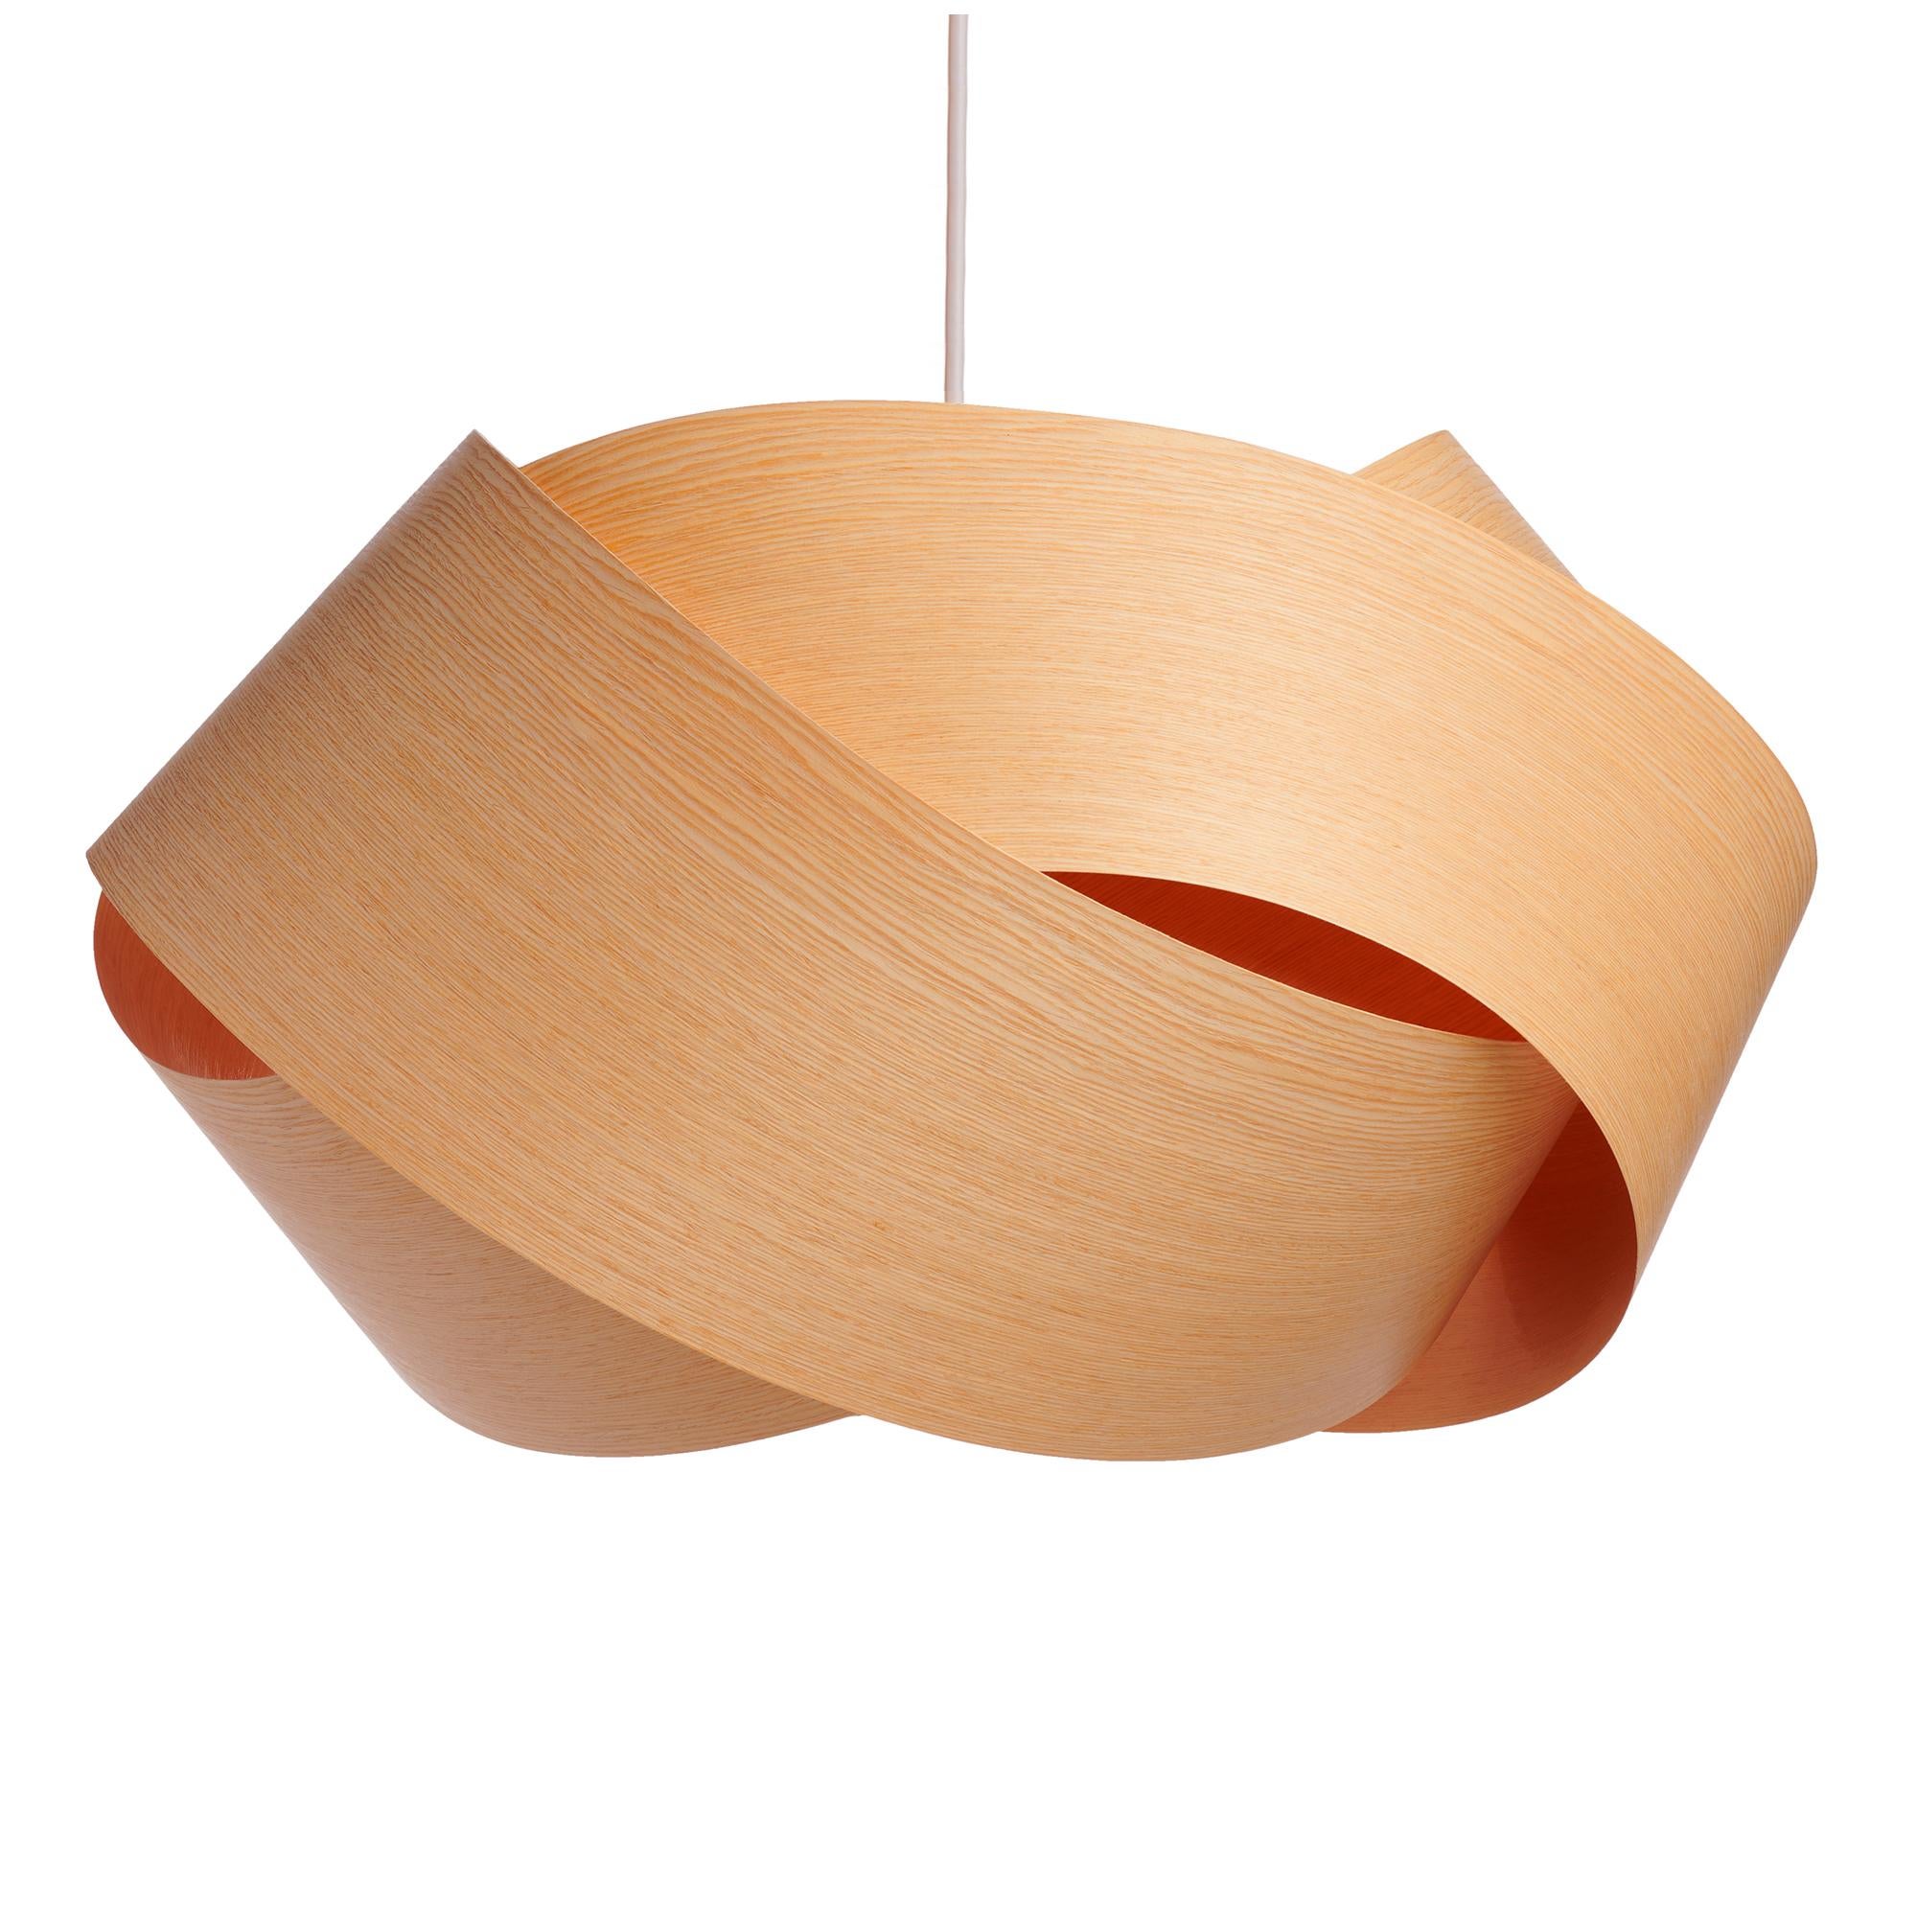 A Scandinavian Modern style pendant. Designers also use this as a Mid-Century Modern statement for alcove, entryway, dining room or conference room. This organic modern shade is customizable, offered in several wood types. Giving a warm light,